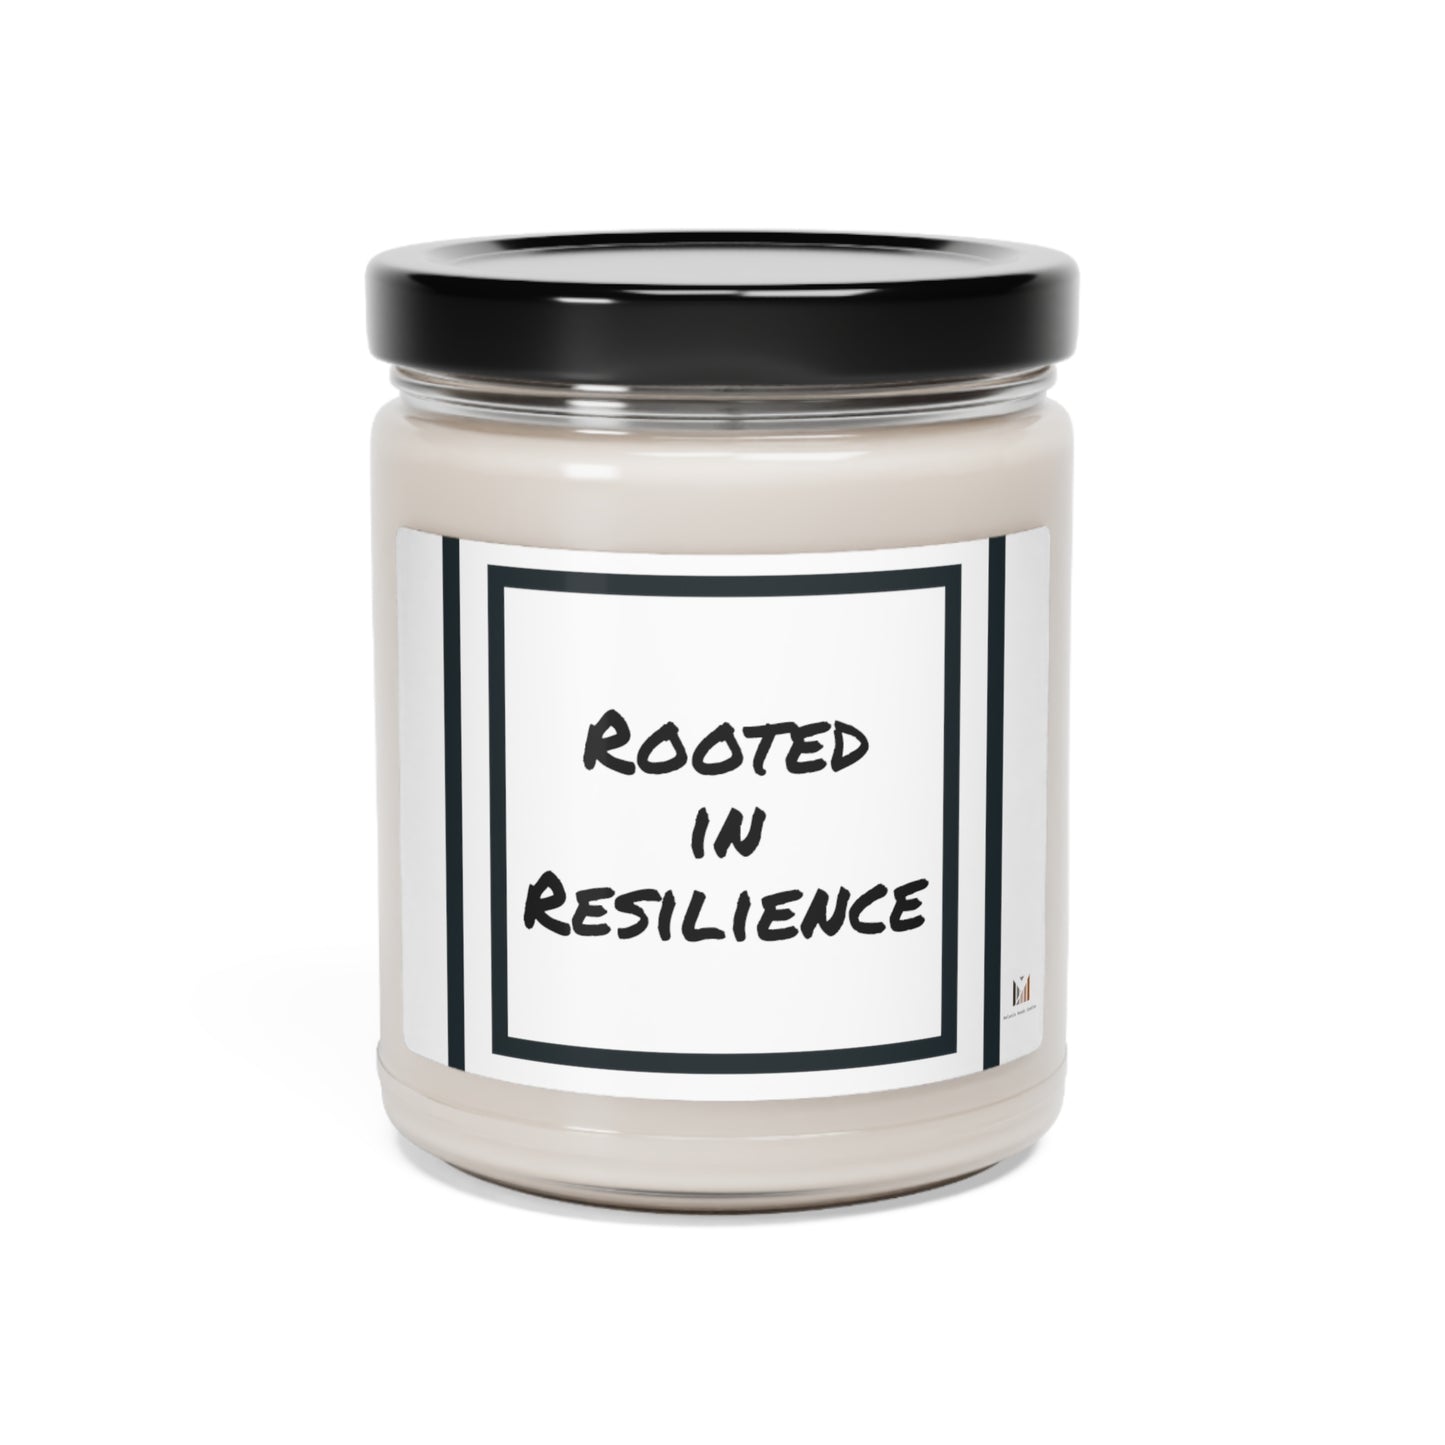 "Rooted" Scented Soy Candle, 9oz